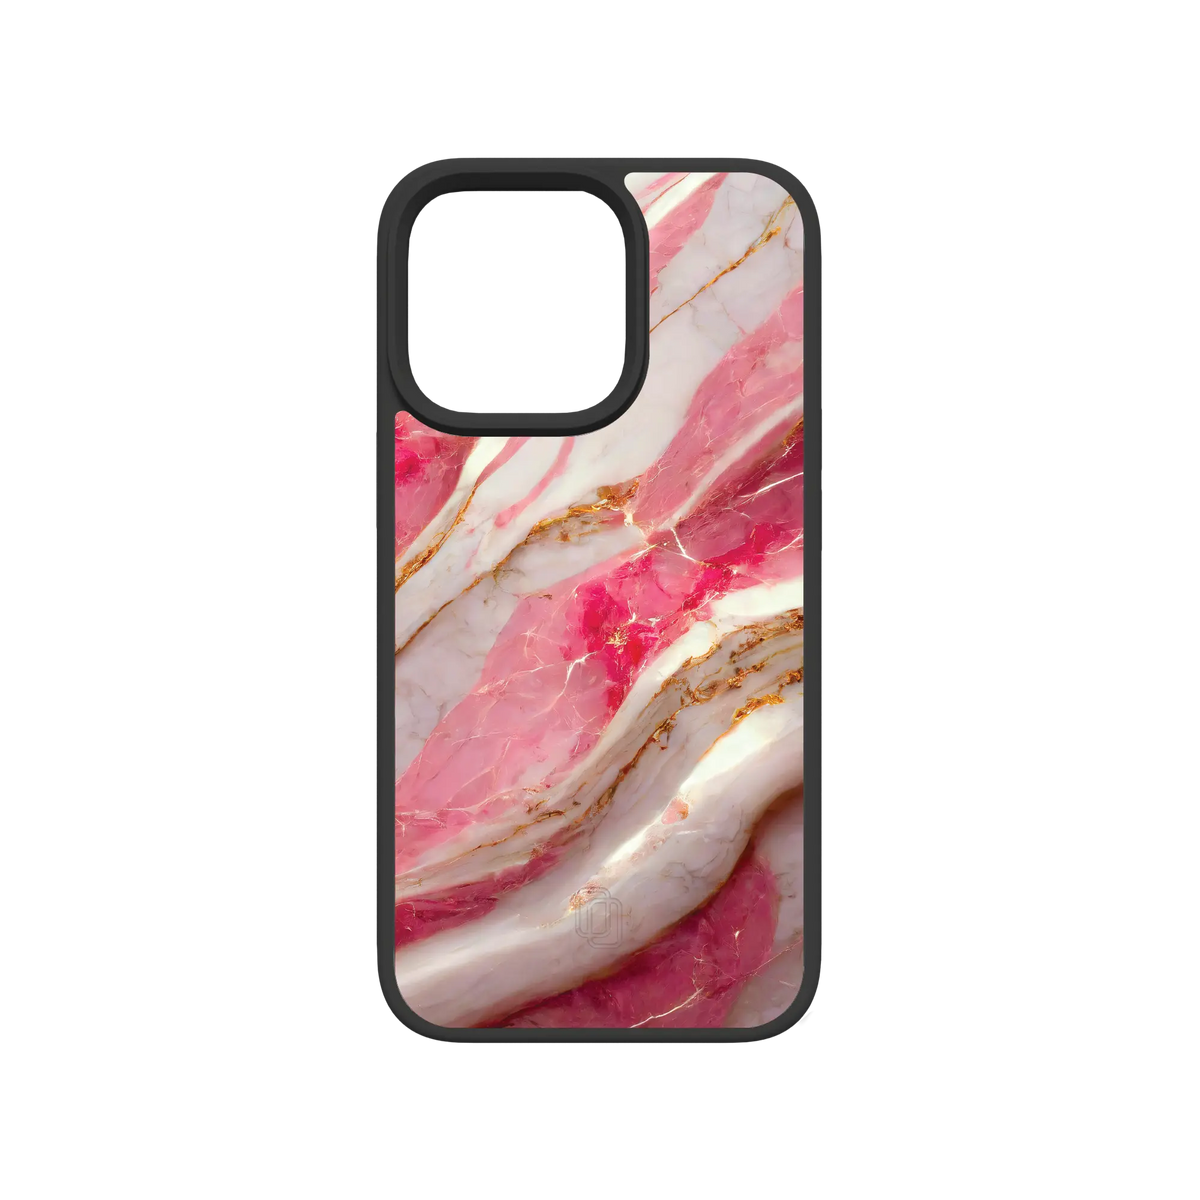 Apple-iPhone-13-Pro-Crystal-Clear New Dawn | Protective MagSafe Pink Marble Case | Marble Stone Collection for Apple iPhone 13 Series cellhelmet cellhelmet